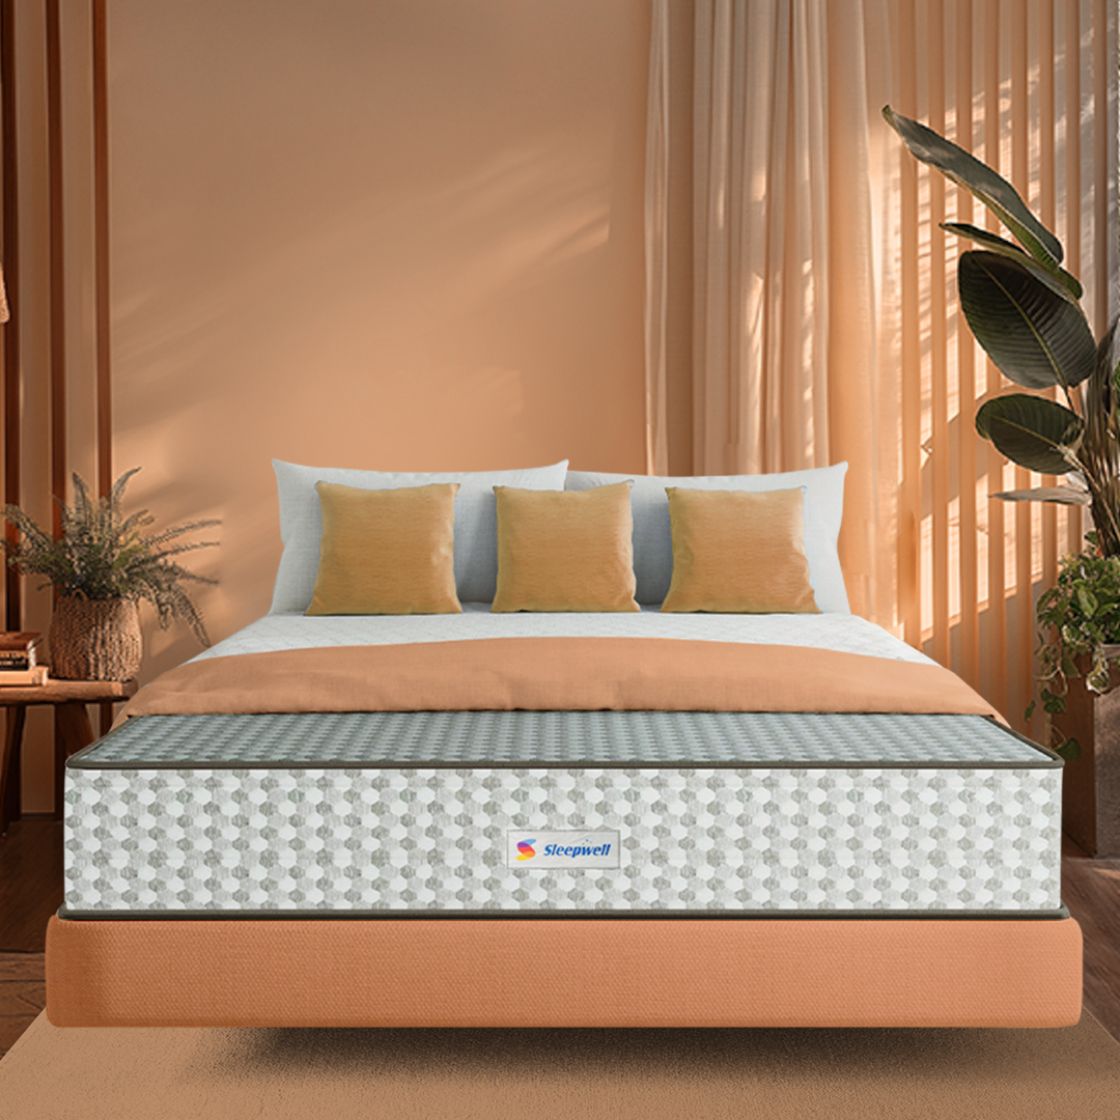 Sleepwell Dual PRO Profiled Foam Reversible 8-inch Double Bed Size, Gentle and Firm, Triple Layered Anti Sag Foam Mattress (Grey, 78x48x8)